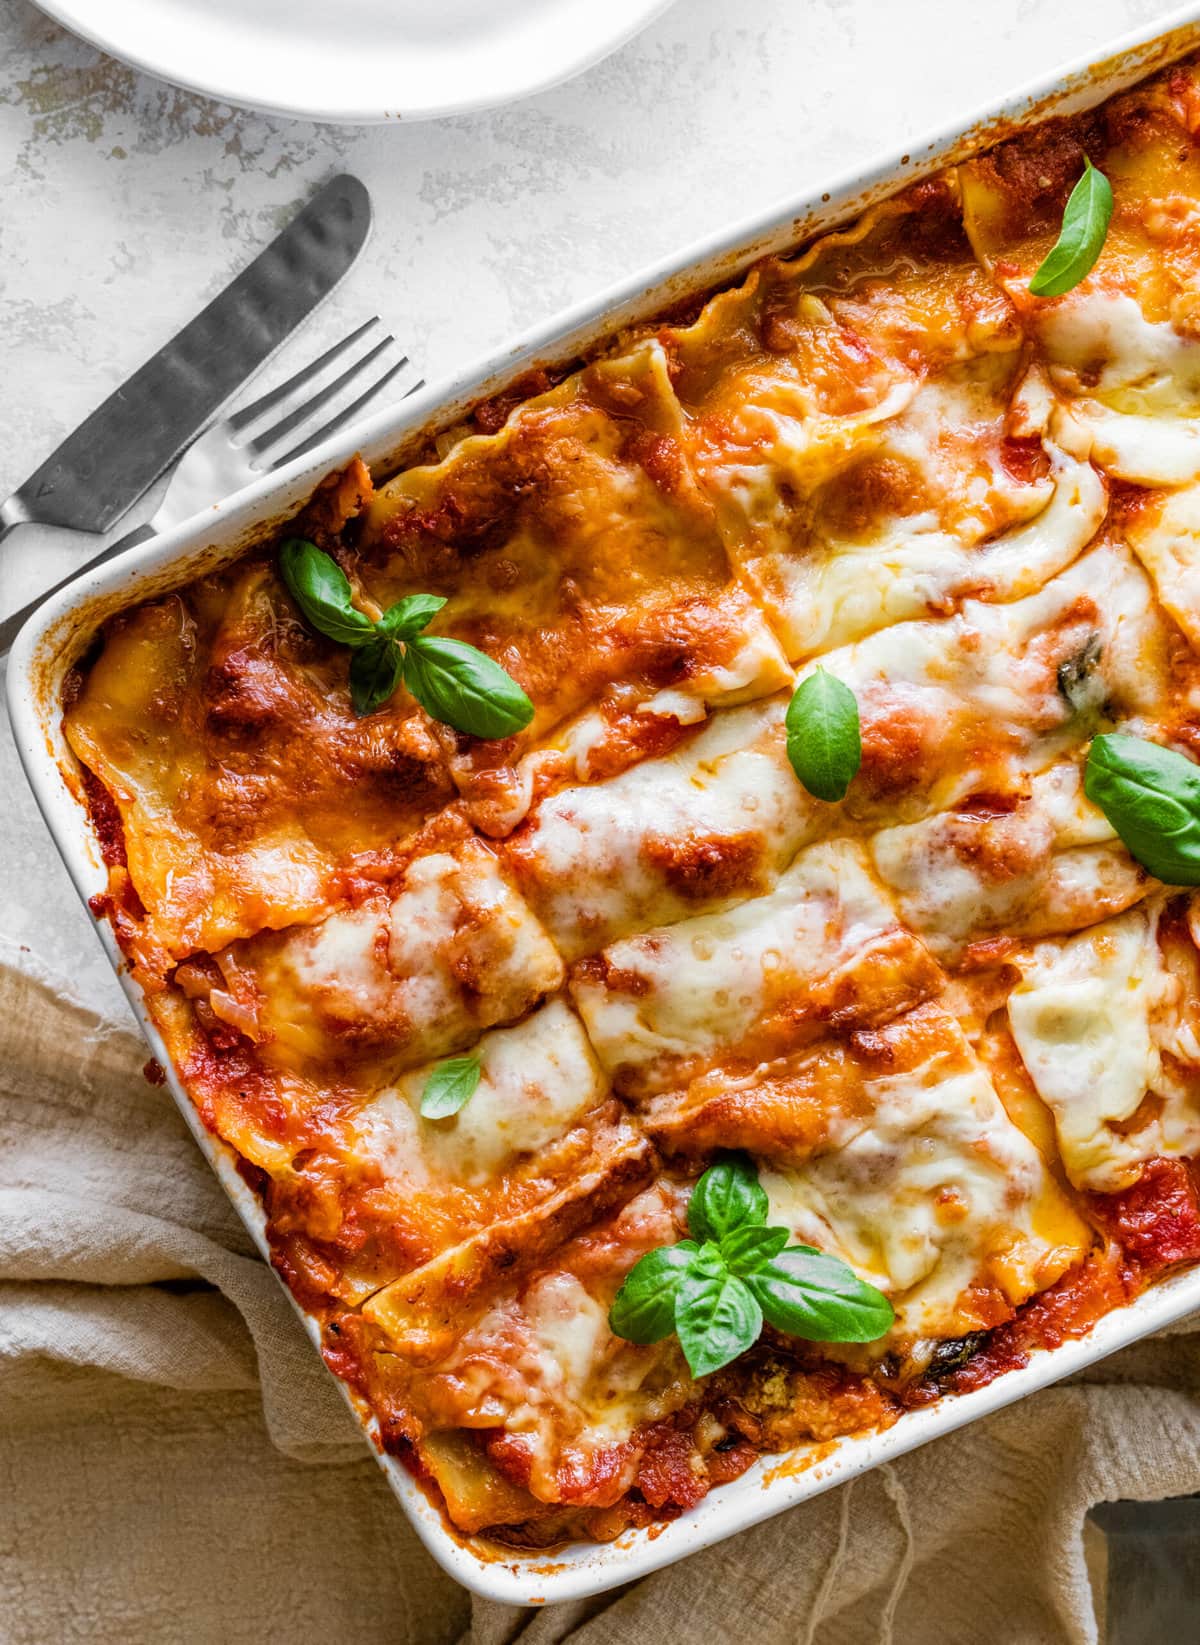 cut in slices of the mediterranean lasagna after it is baked in the oven with a cheesy top. Basil leaves as garnish.